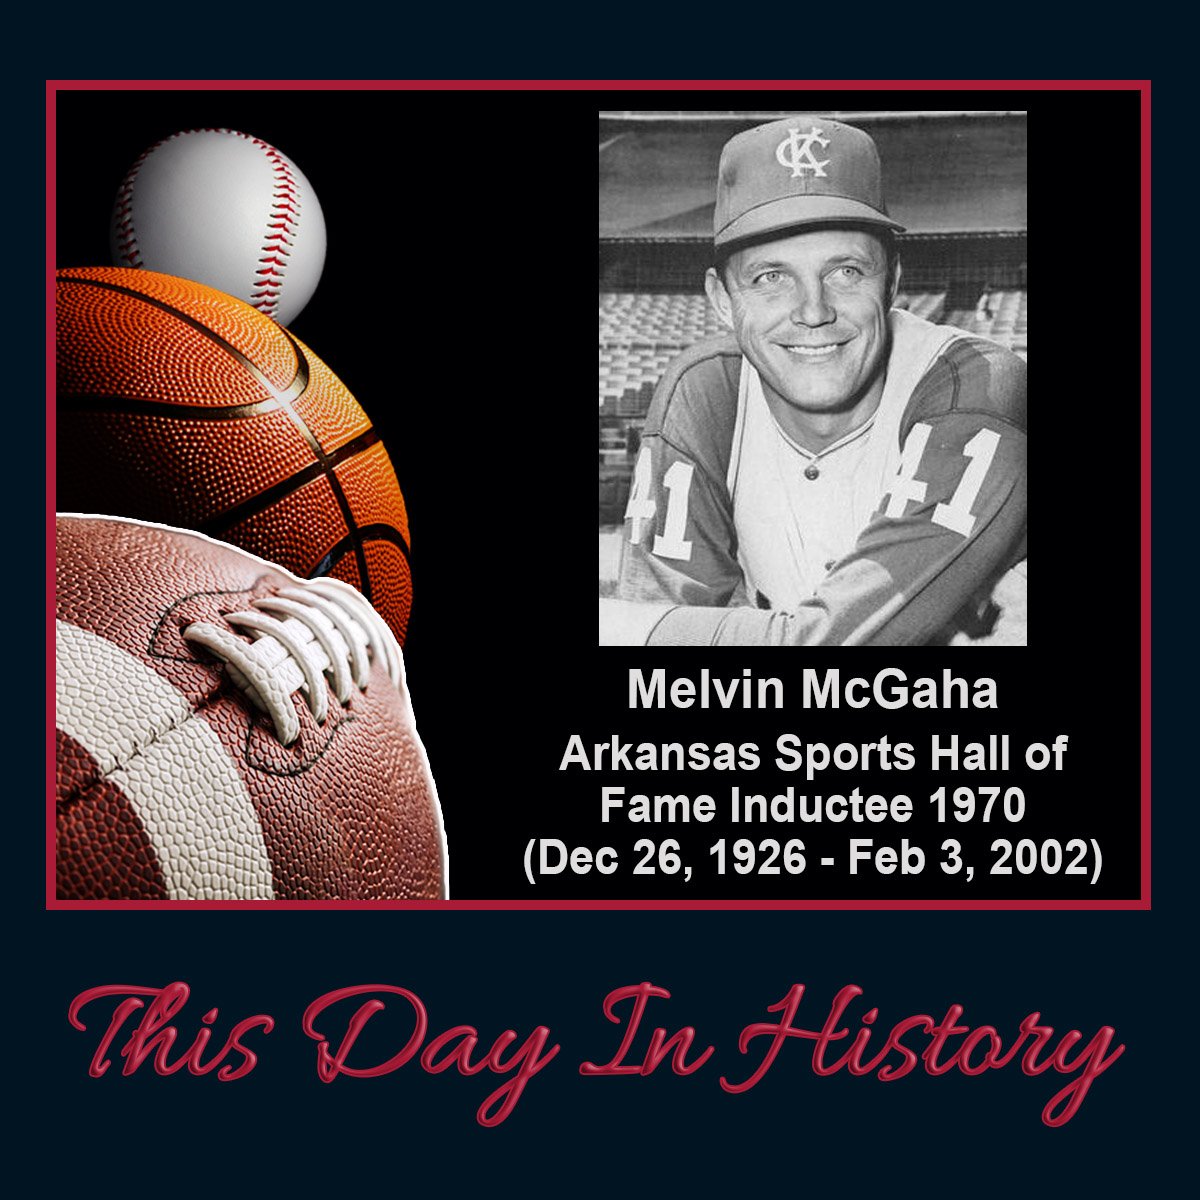 Mel is one of the most versatile athletes in Razorback history (letters in basketball/football/baseball). He played professionaly with the St. Louis Cardinals, New York Knicks, head basketball coach at Arkansas A&M for two seasons. ASHOF 1970. @RazorbackFB @Cardinals @nyknicks